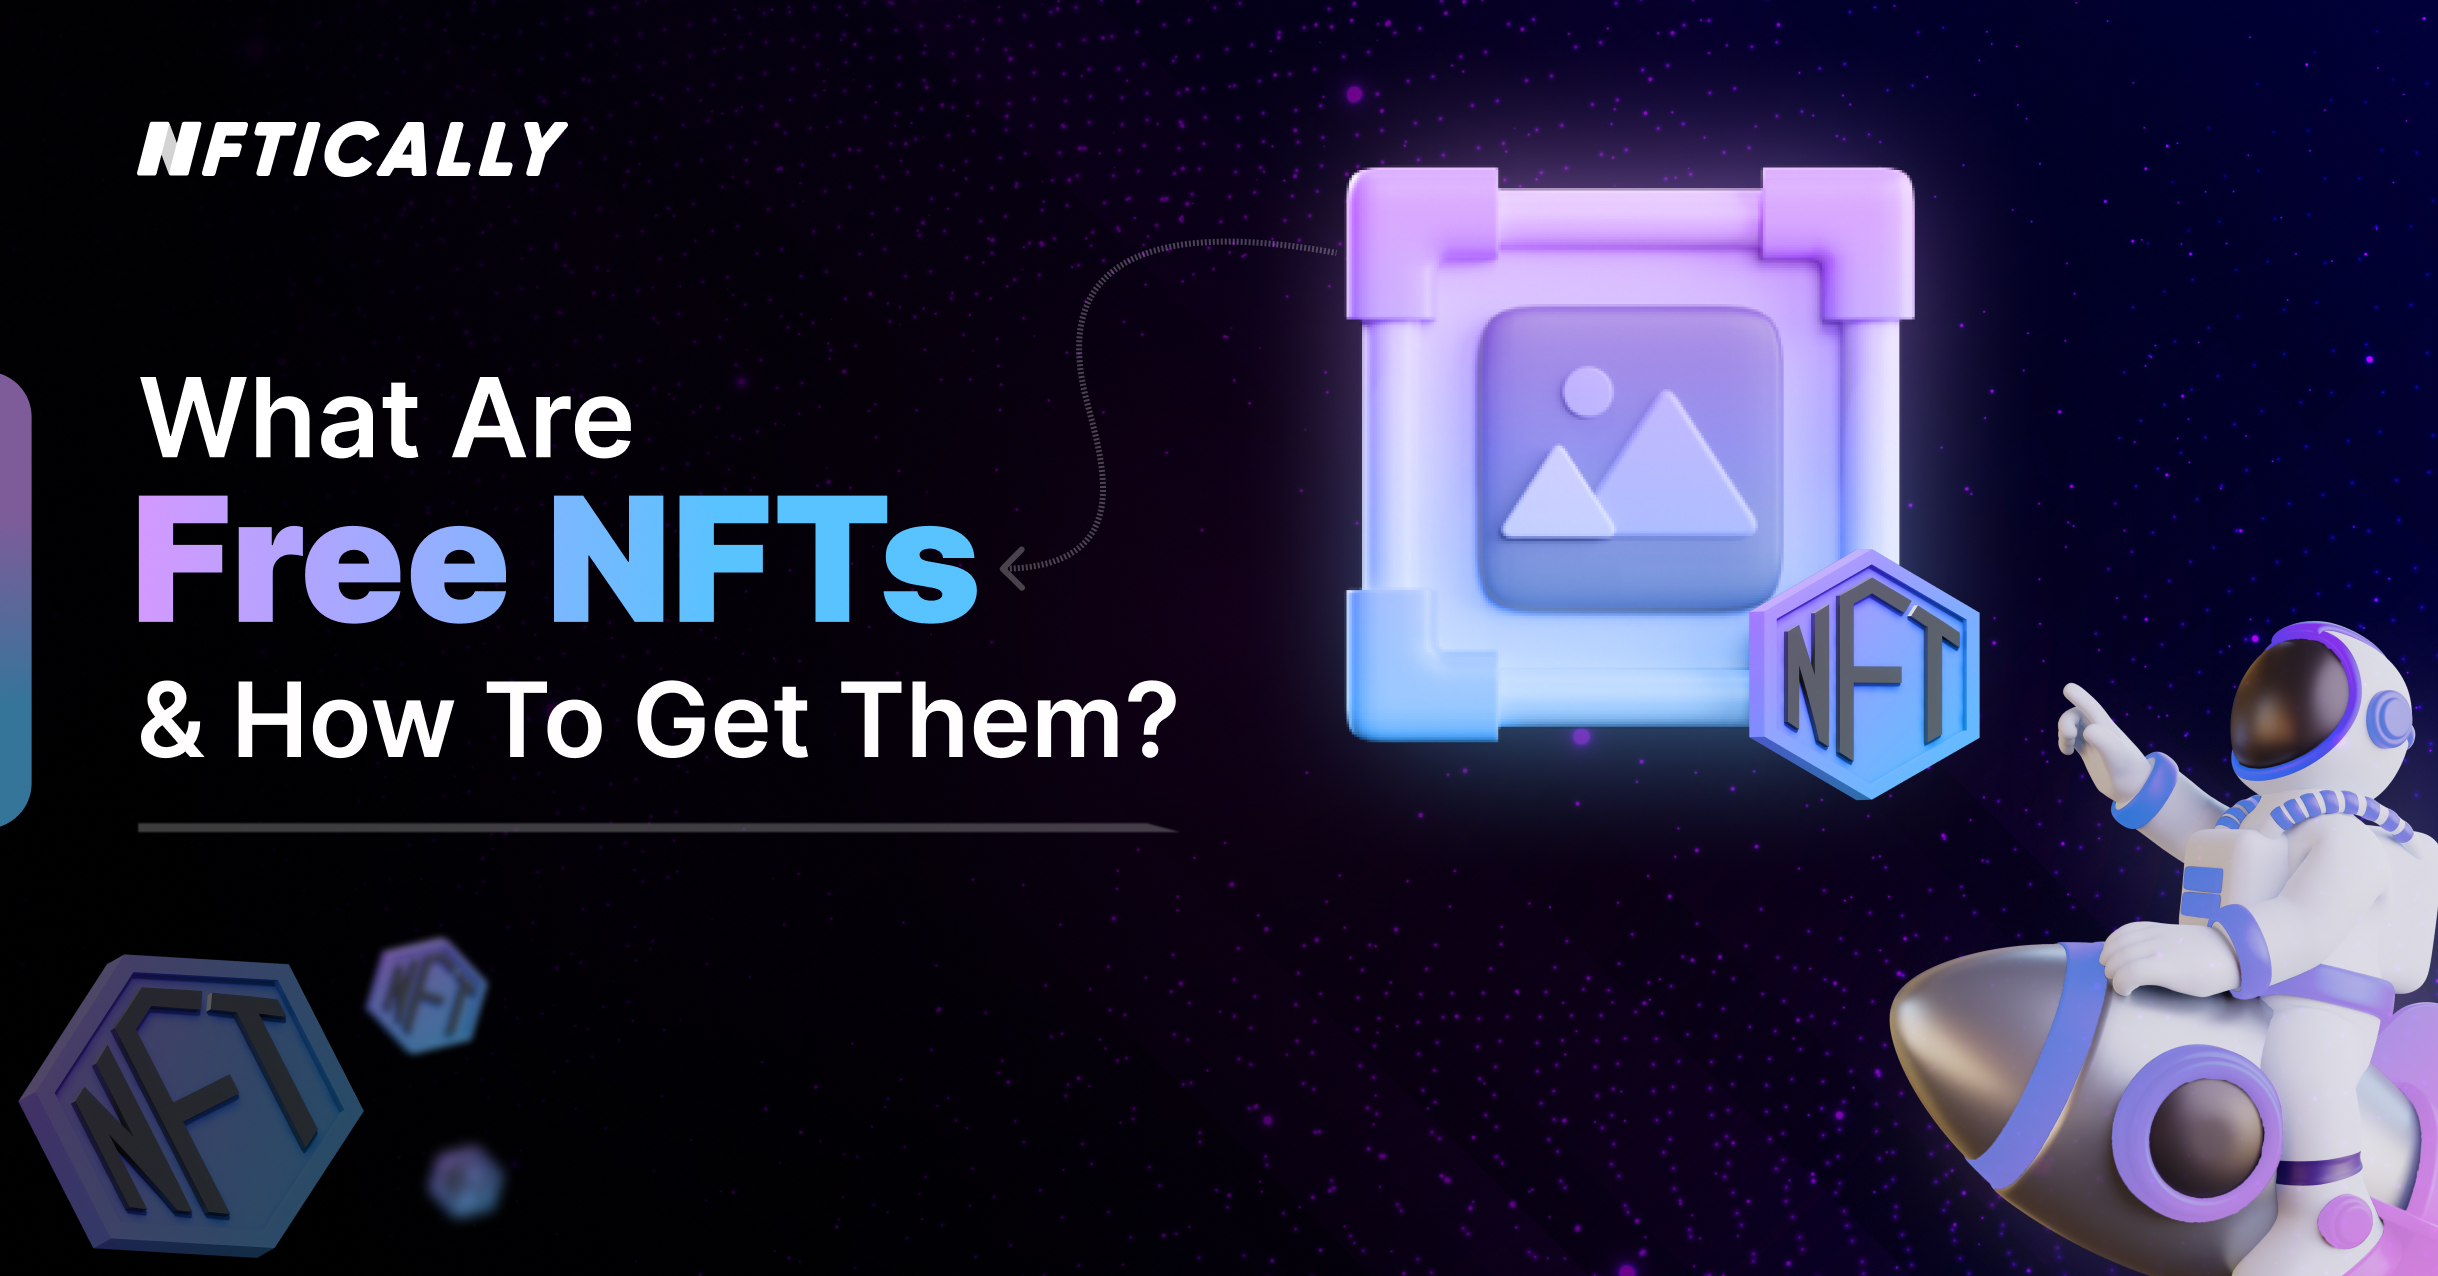 What are Free NFTs and how to get them?